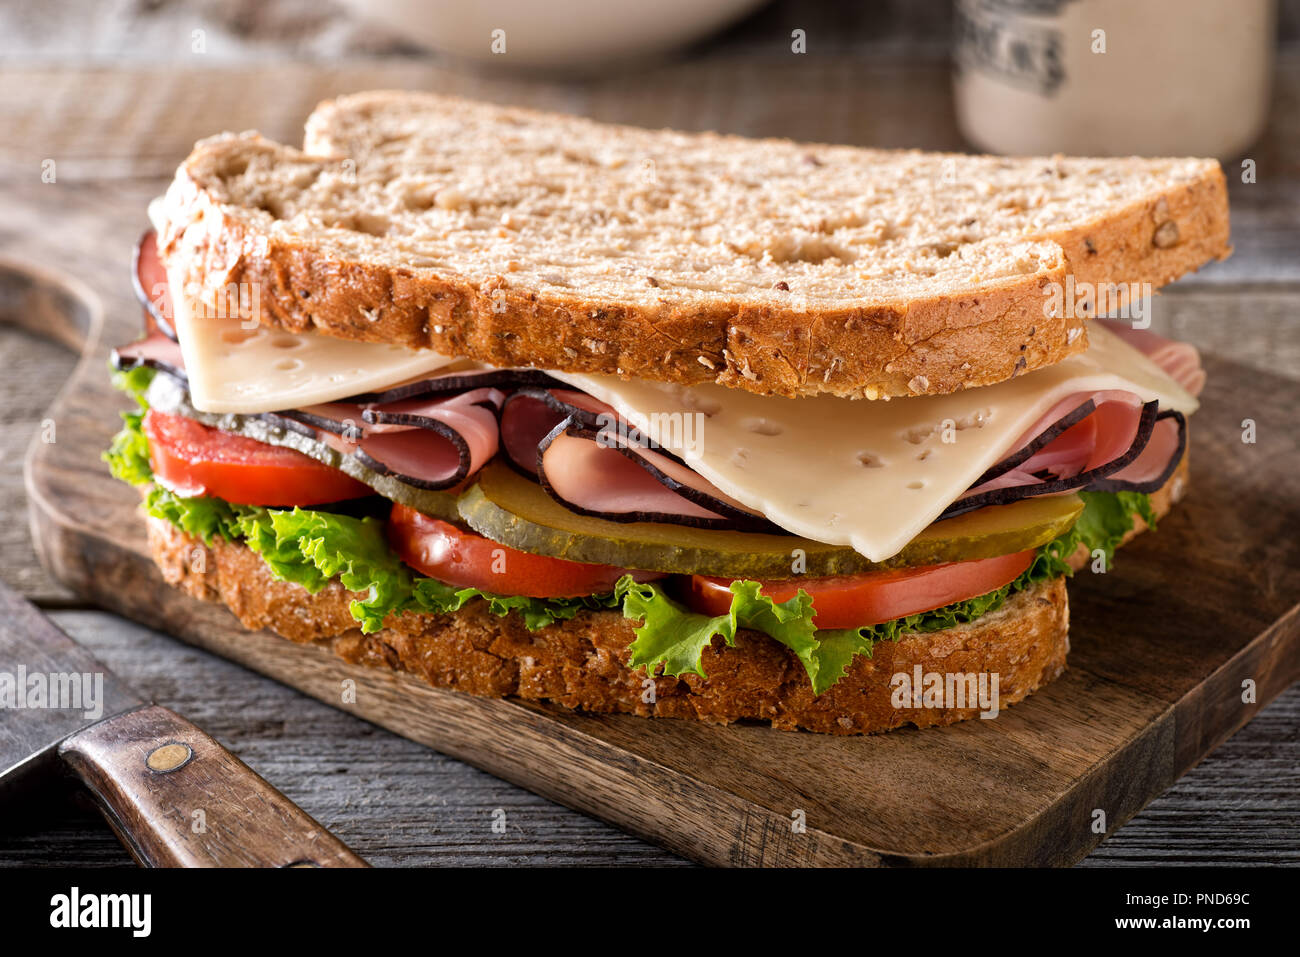 A delicious ham and cheese sandwich with lettuce, tomato and dill pickle on a rustic wood table. Stock Photo